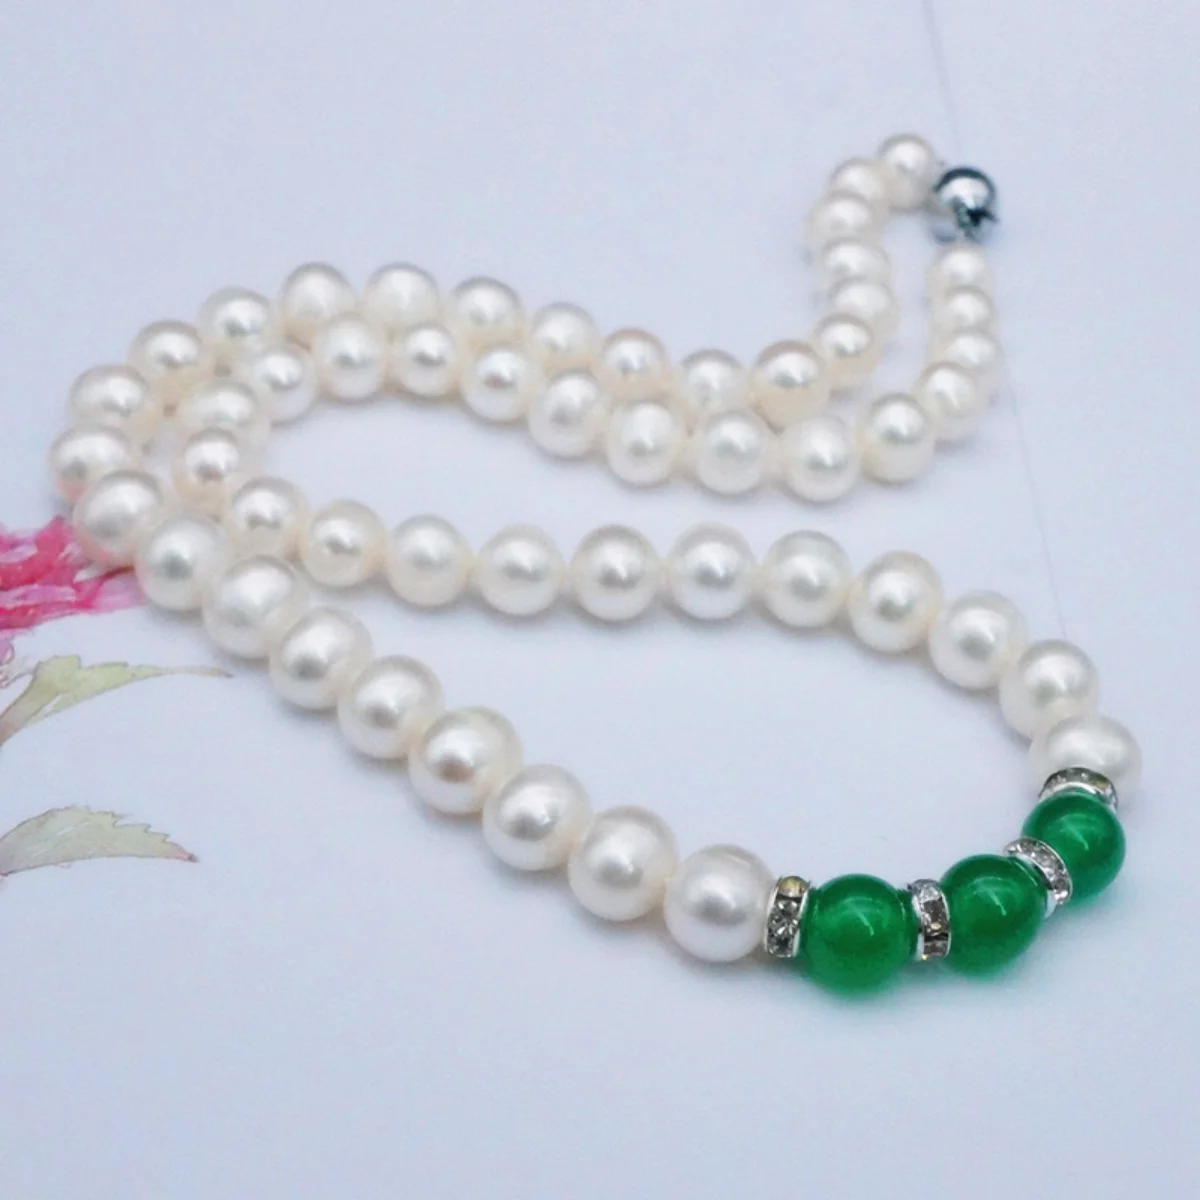 

7-8 8-9mm Near Round White Genuine Freshwater Pearl Necklace with Green Jades Chalcedony Bead Chains Women Jewelry Making Design